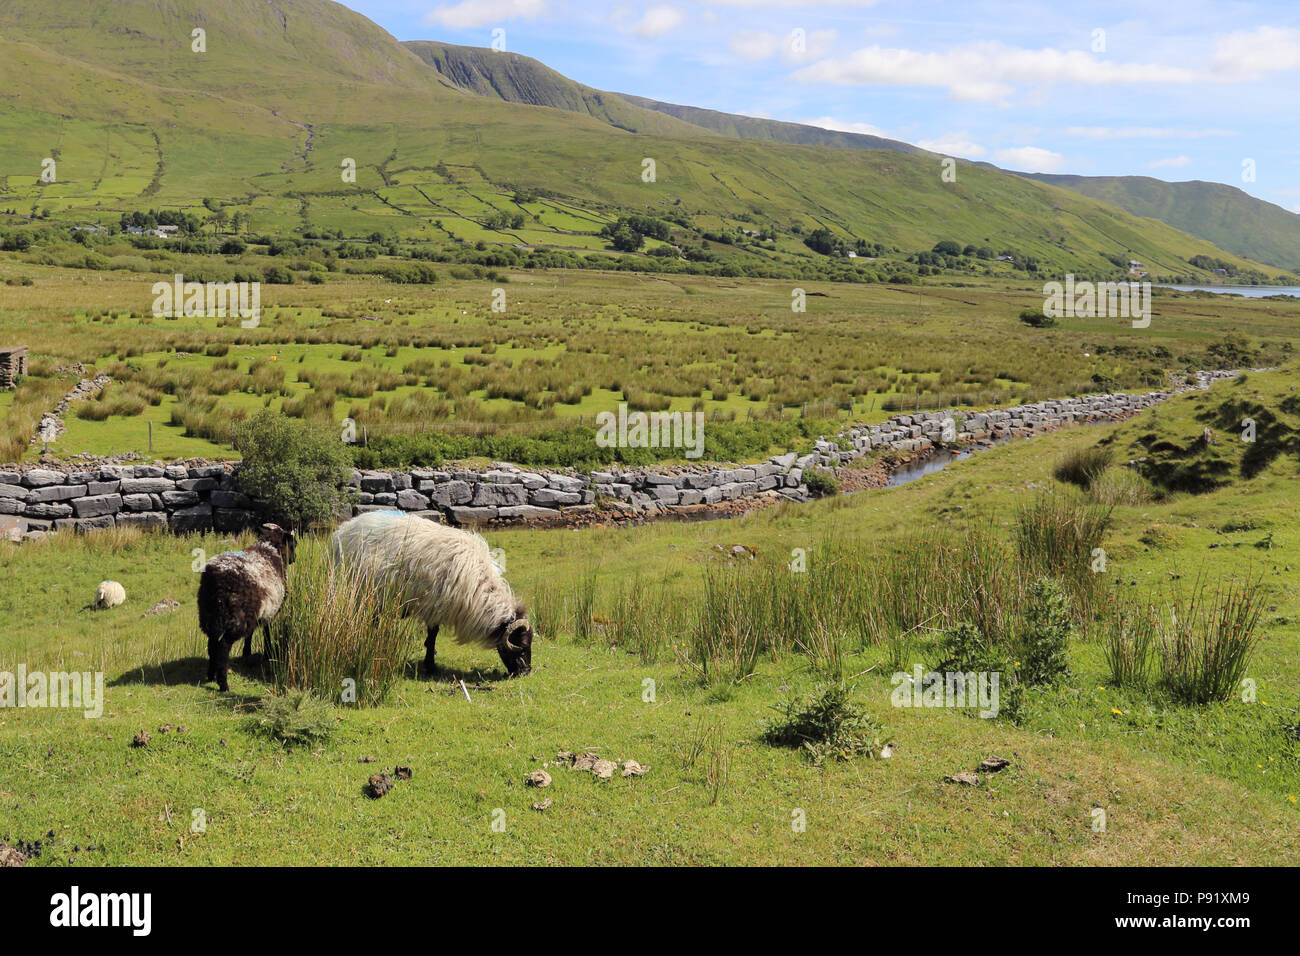 Landscape of the Connemara district  in Ireland, with Irish sheep in field. Stock Photo